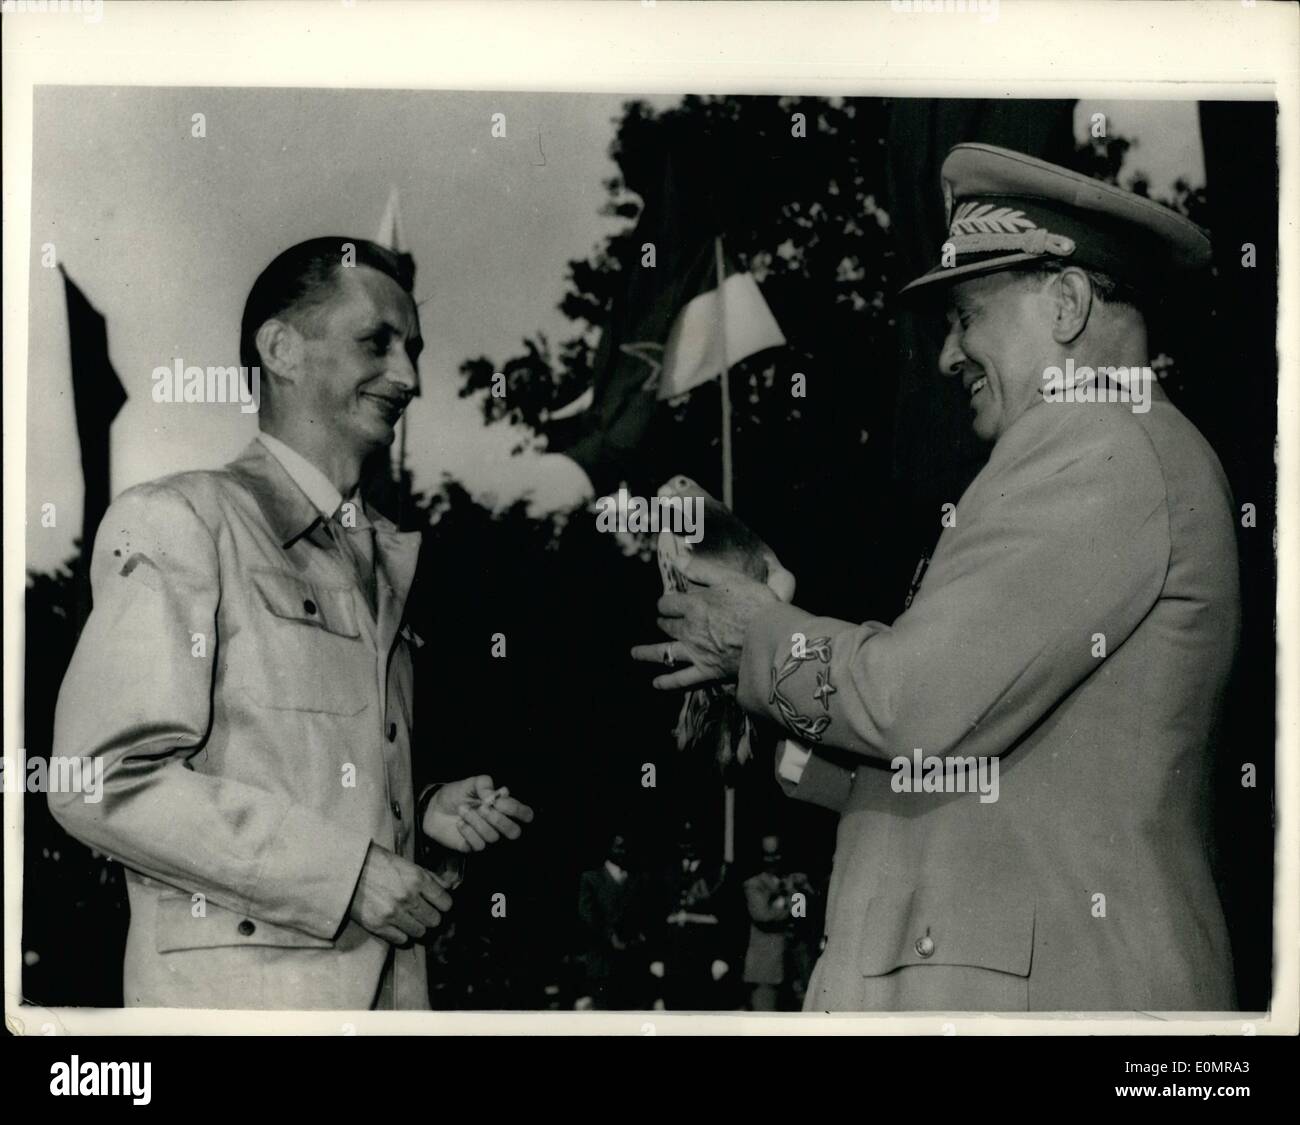 May 05, 1956 - President Tito's Birthday Celebrations: Representatives of the six Federal Republics of Yugoslavia and the Army presented their congratulations to President Tito on the occasion of his 64th birthday during the celebrations in Belgrade. Photo shows President Tito is presented with a carrier pigeon presented to him by Jugoslav postal workers to mark his 64th birthday. Stock Photo